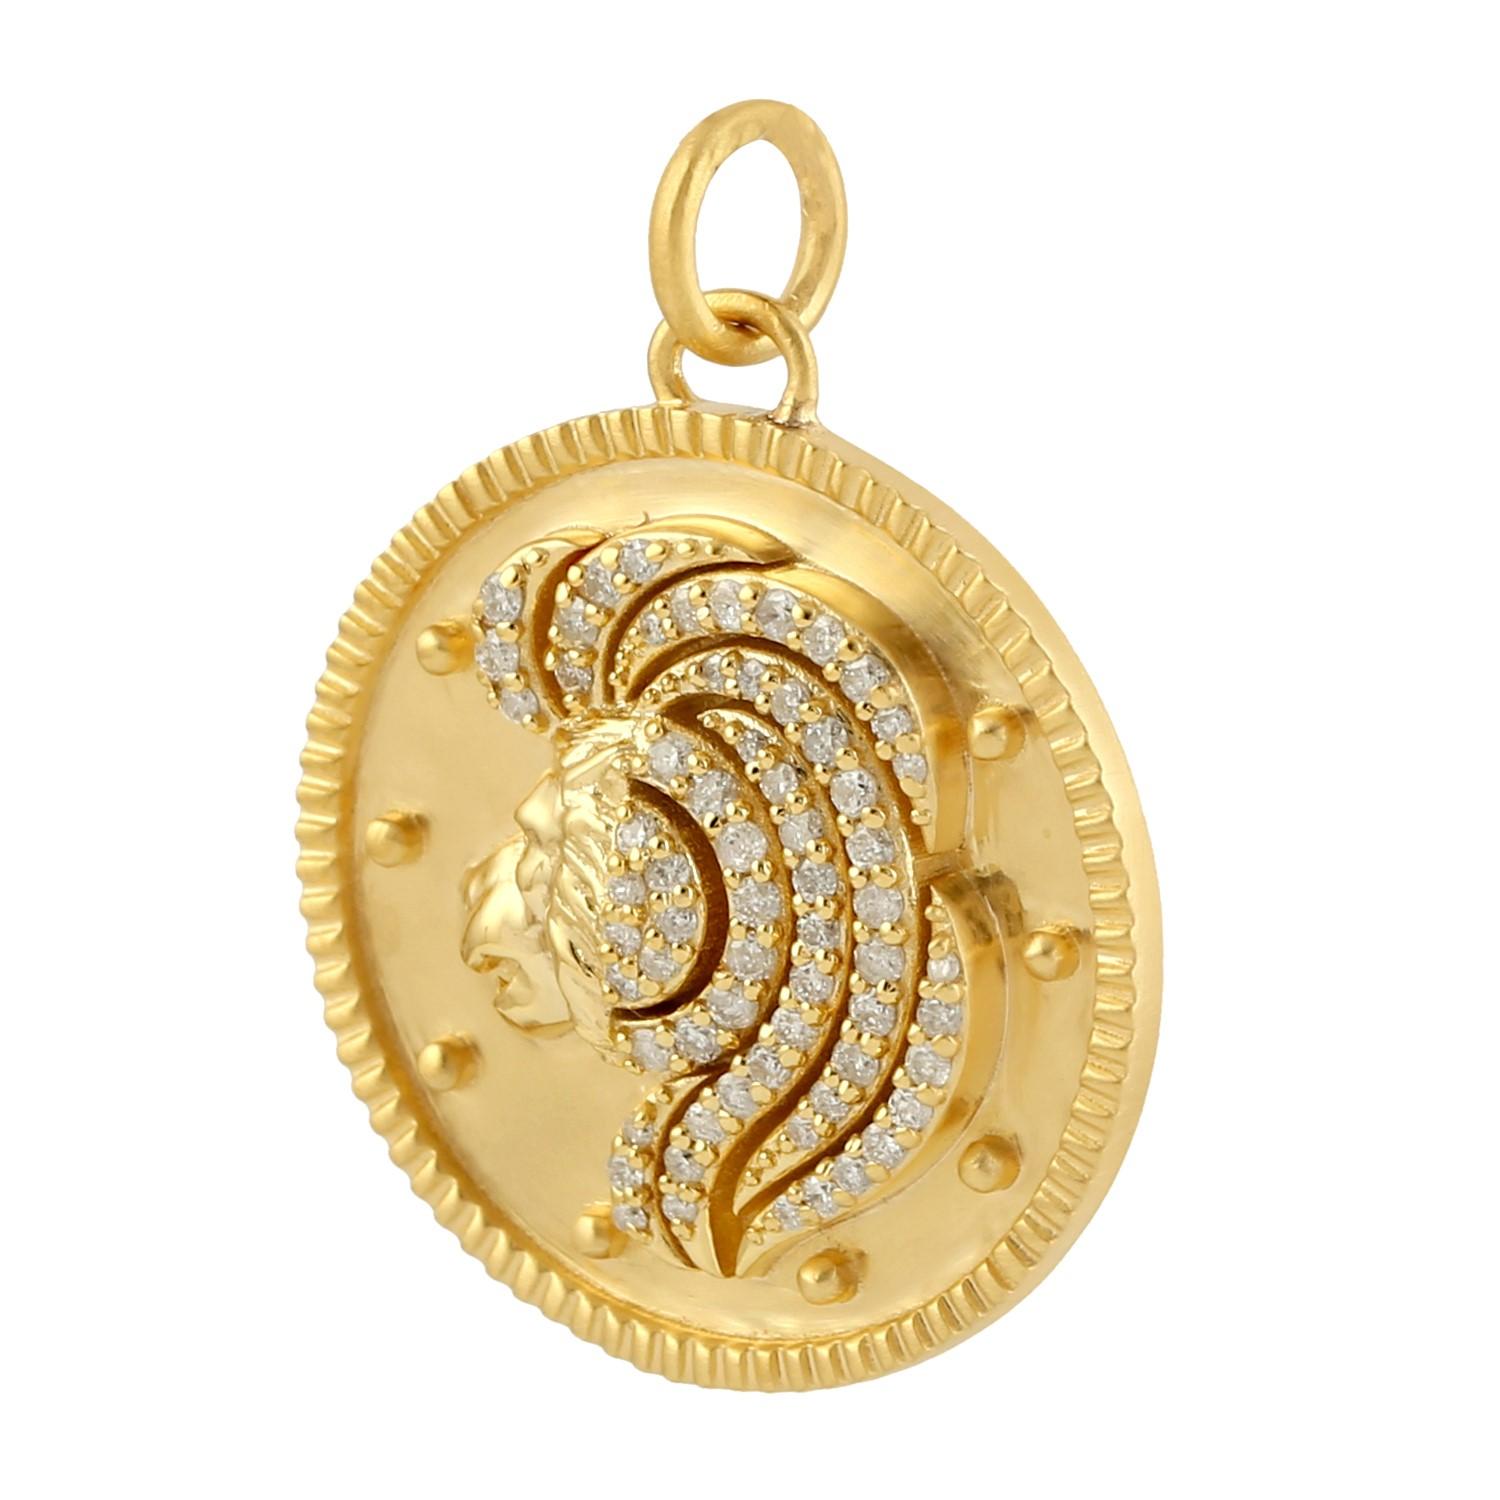 The 14 karat gold pendant is hand set with .35 carats of sparkling diamonds. See matching Zodiac rings and other Zodiac Charm Collection.

FOLLOW MEGHNA JEWELS storefront to view the latest collection & exclusive pieces. Meghna Jewels is proudly